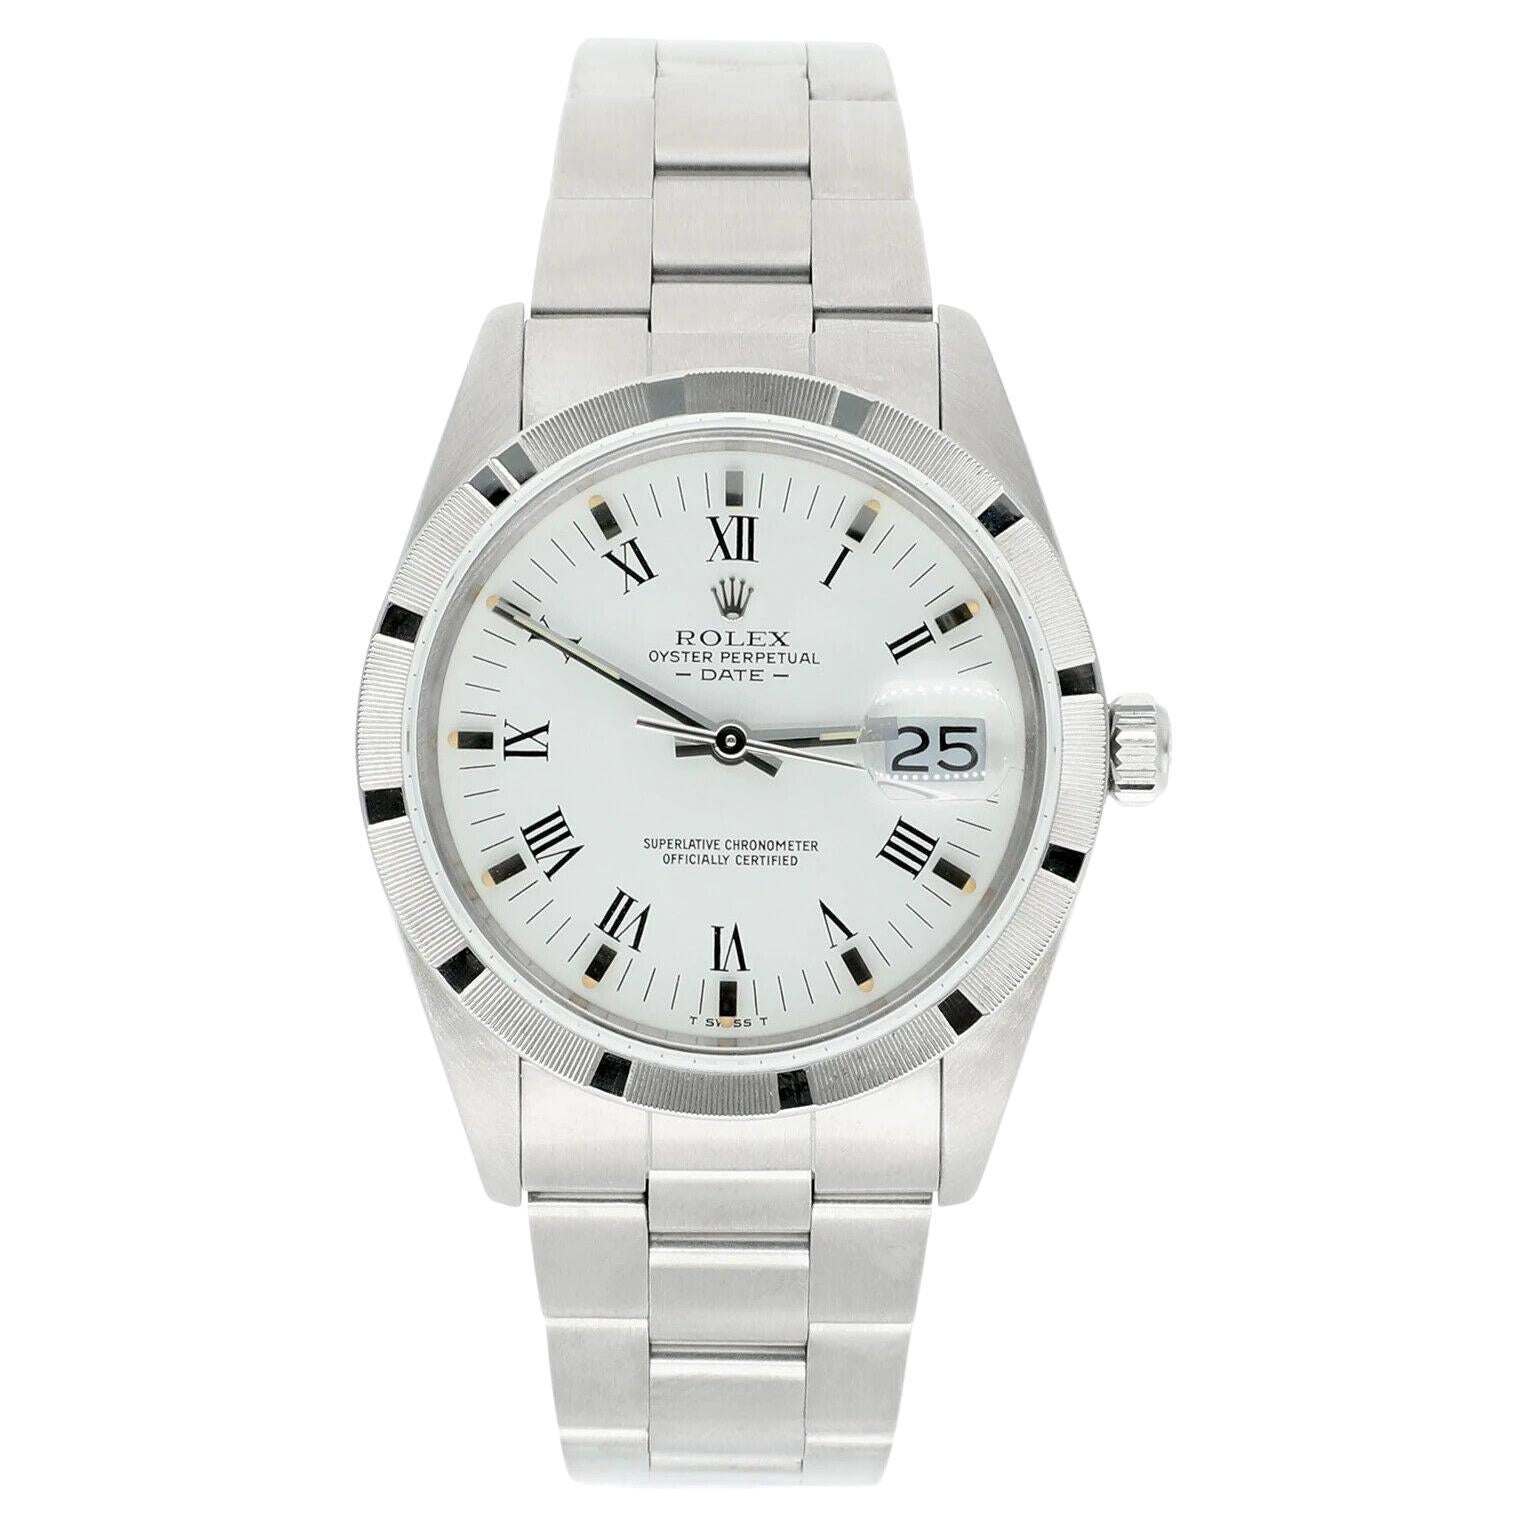 Unisex Rolex Date Stainless Steel Watch Oyster White Roman Dial 15010 Circa 1988 For Sale